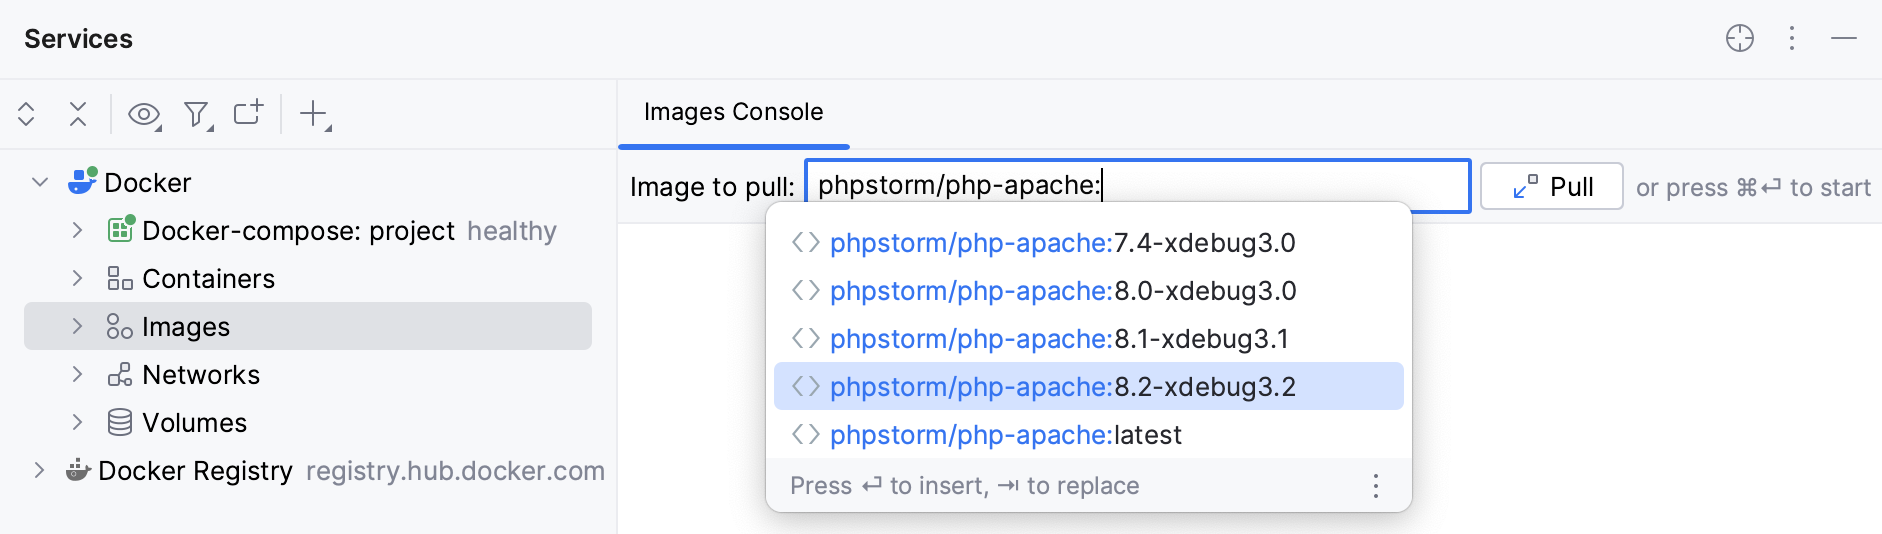 The Pull Image dialog